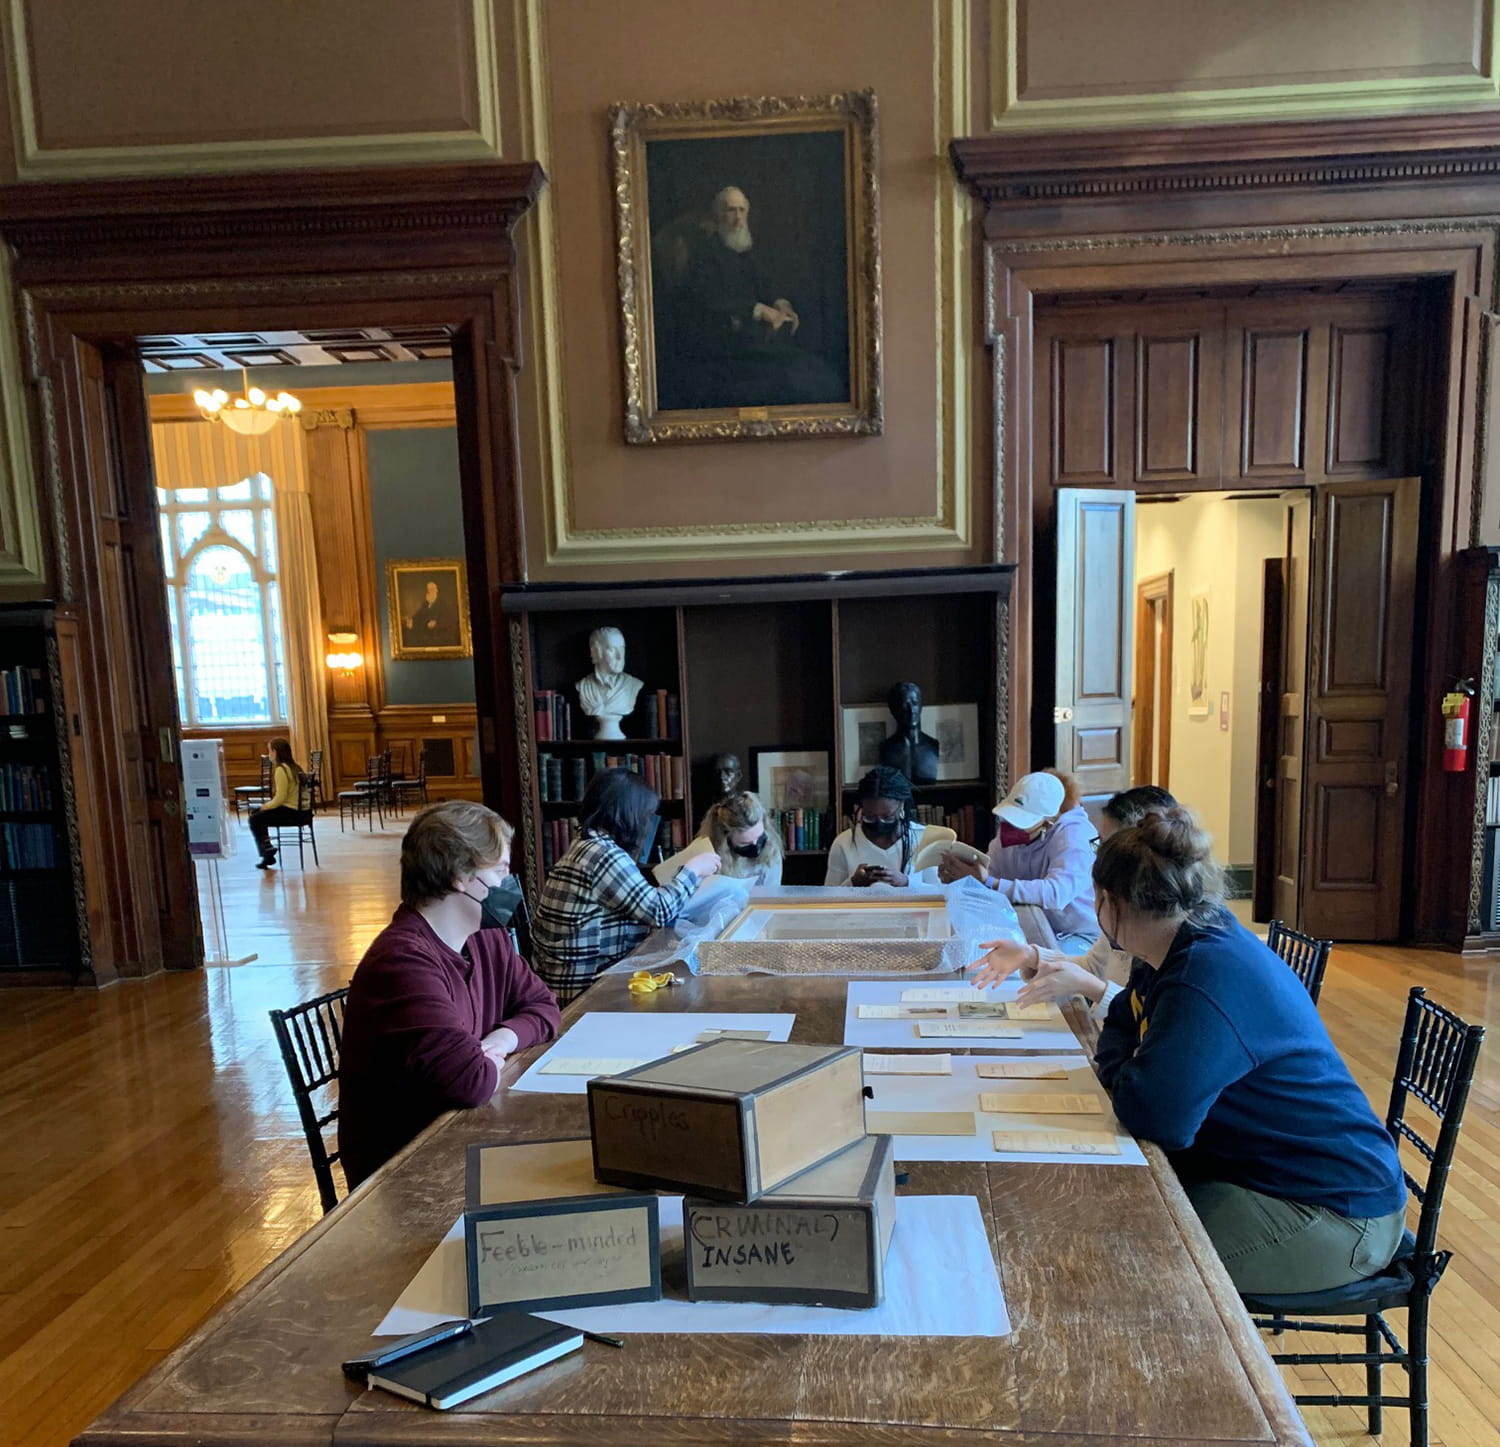 Students studying books at a table in the Mutter Museum.